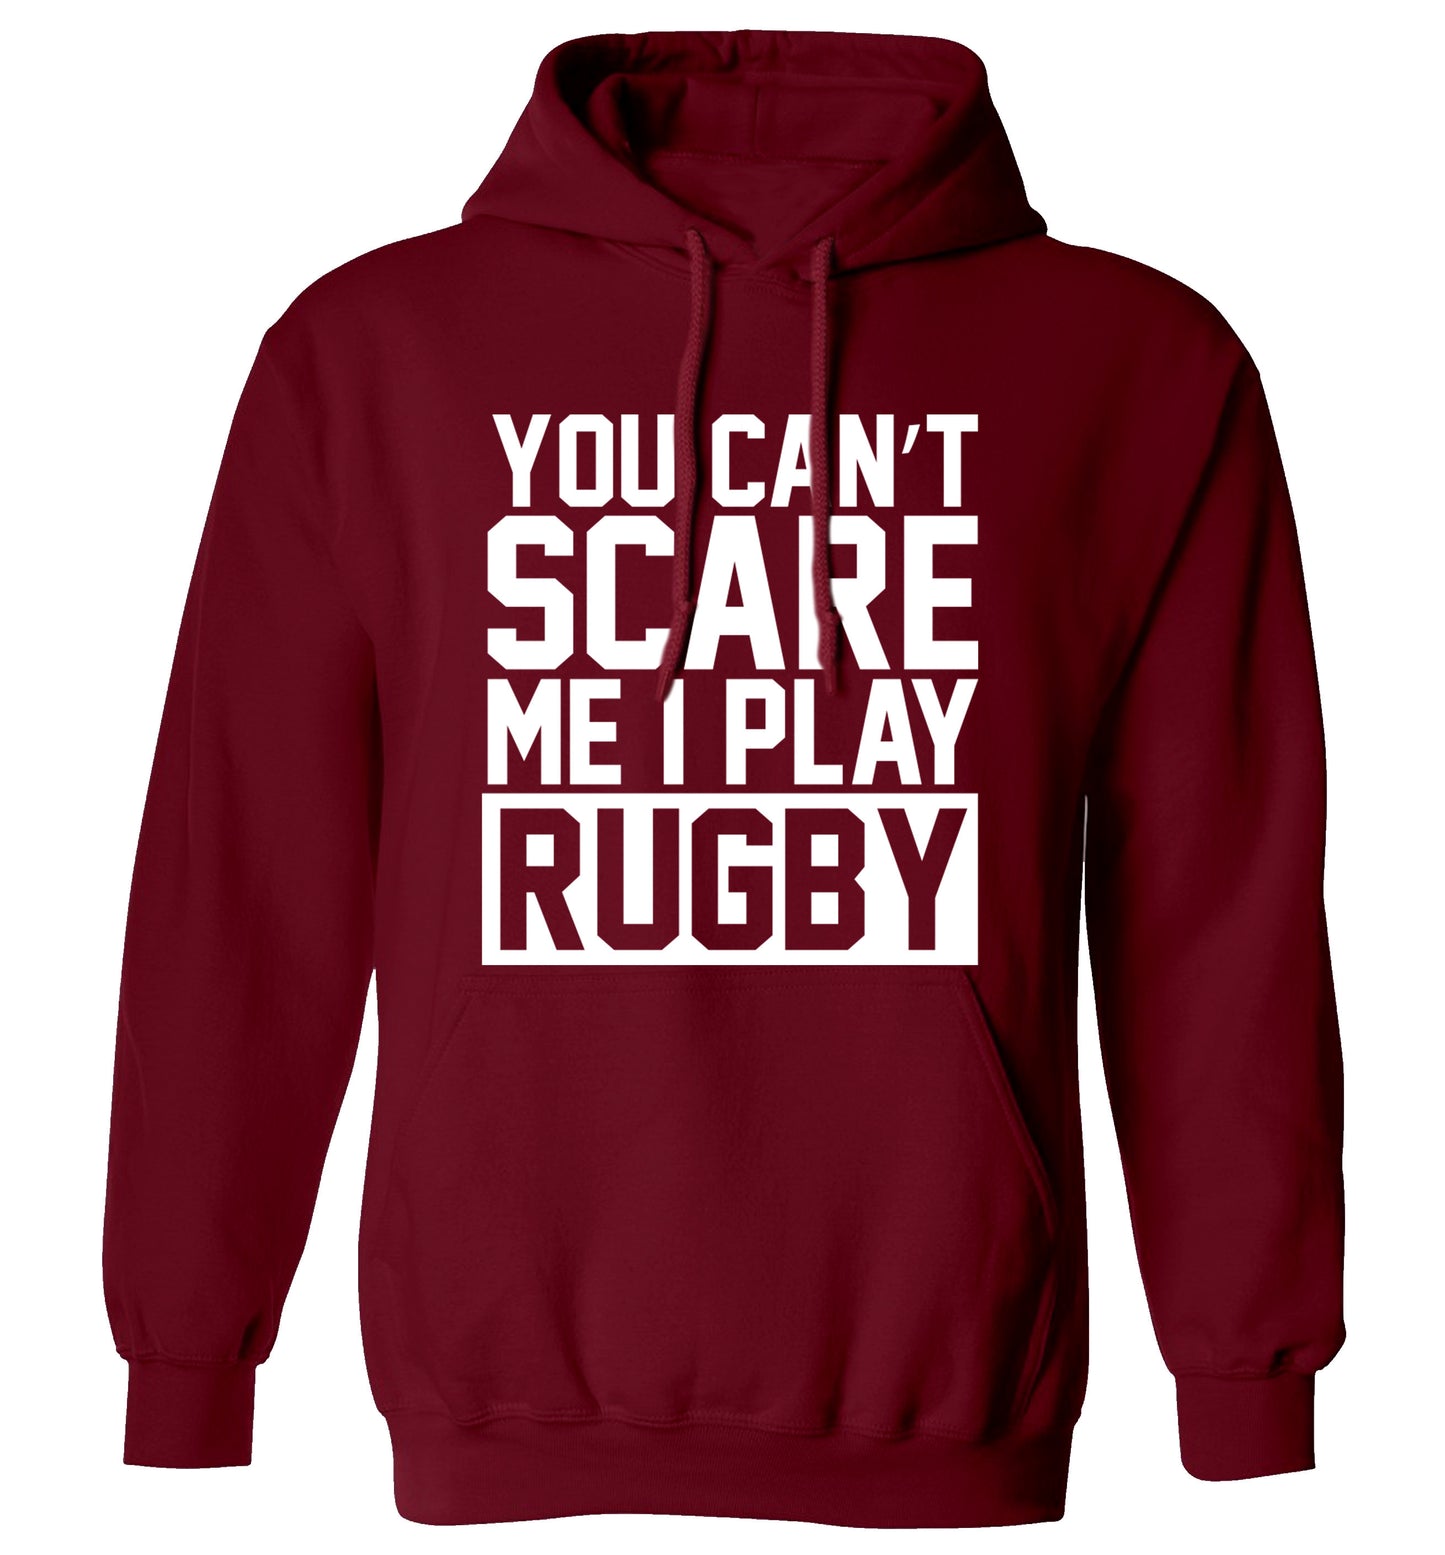 You can't scare me I play rugby adults unisex maroon hoodie 2XL